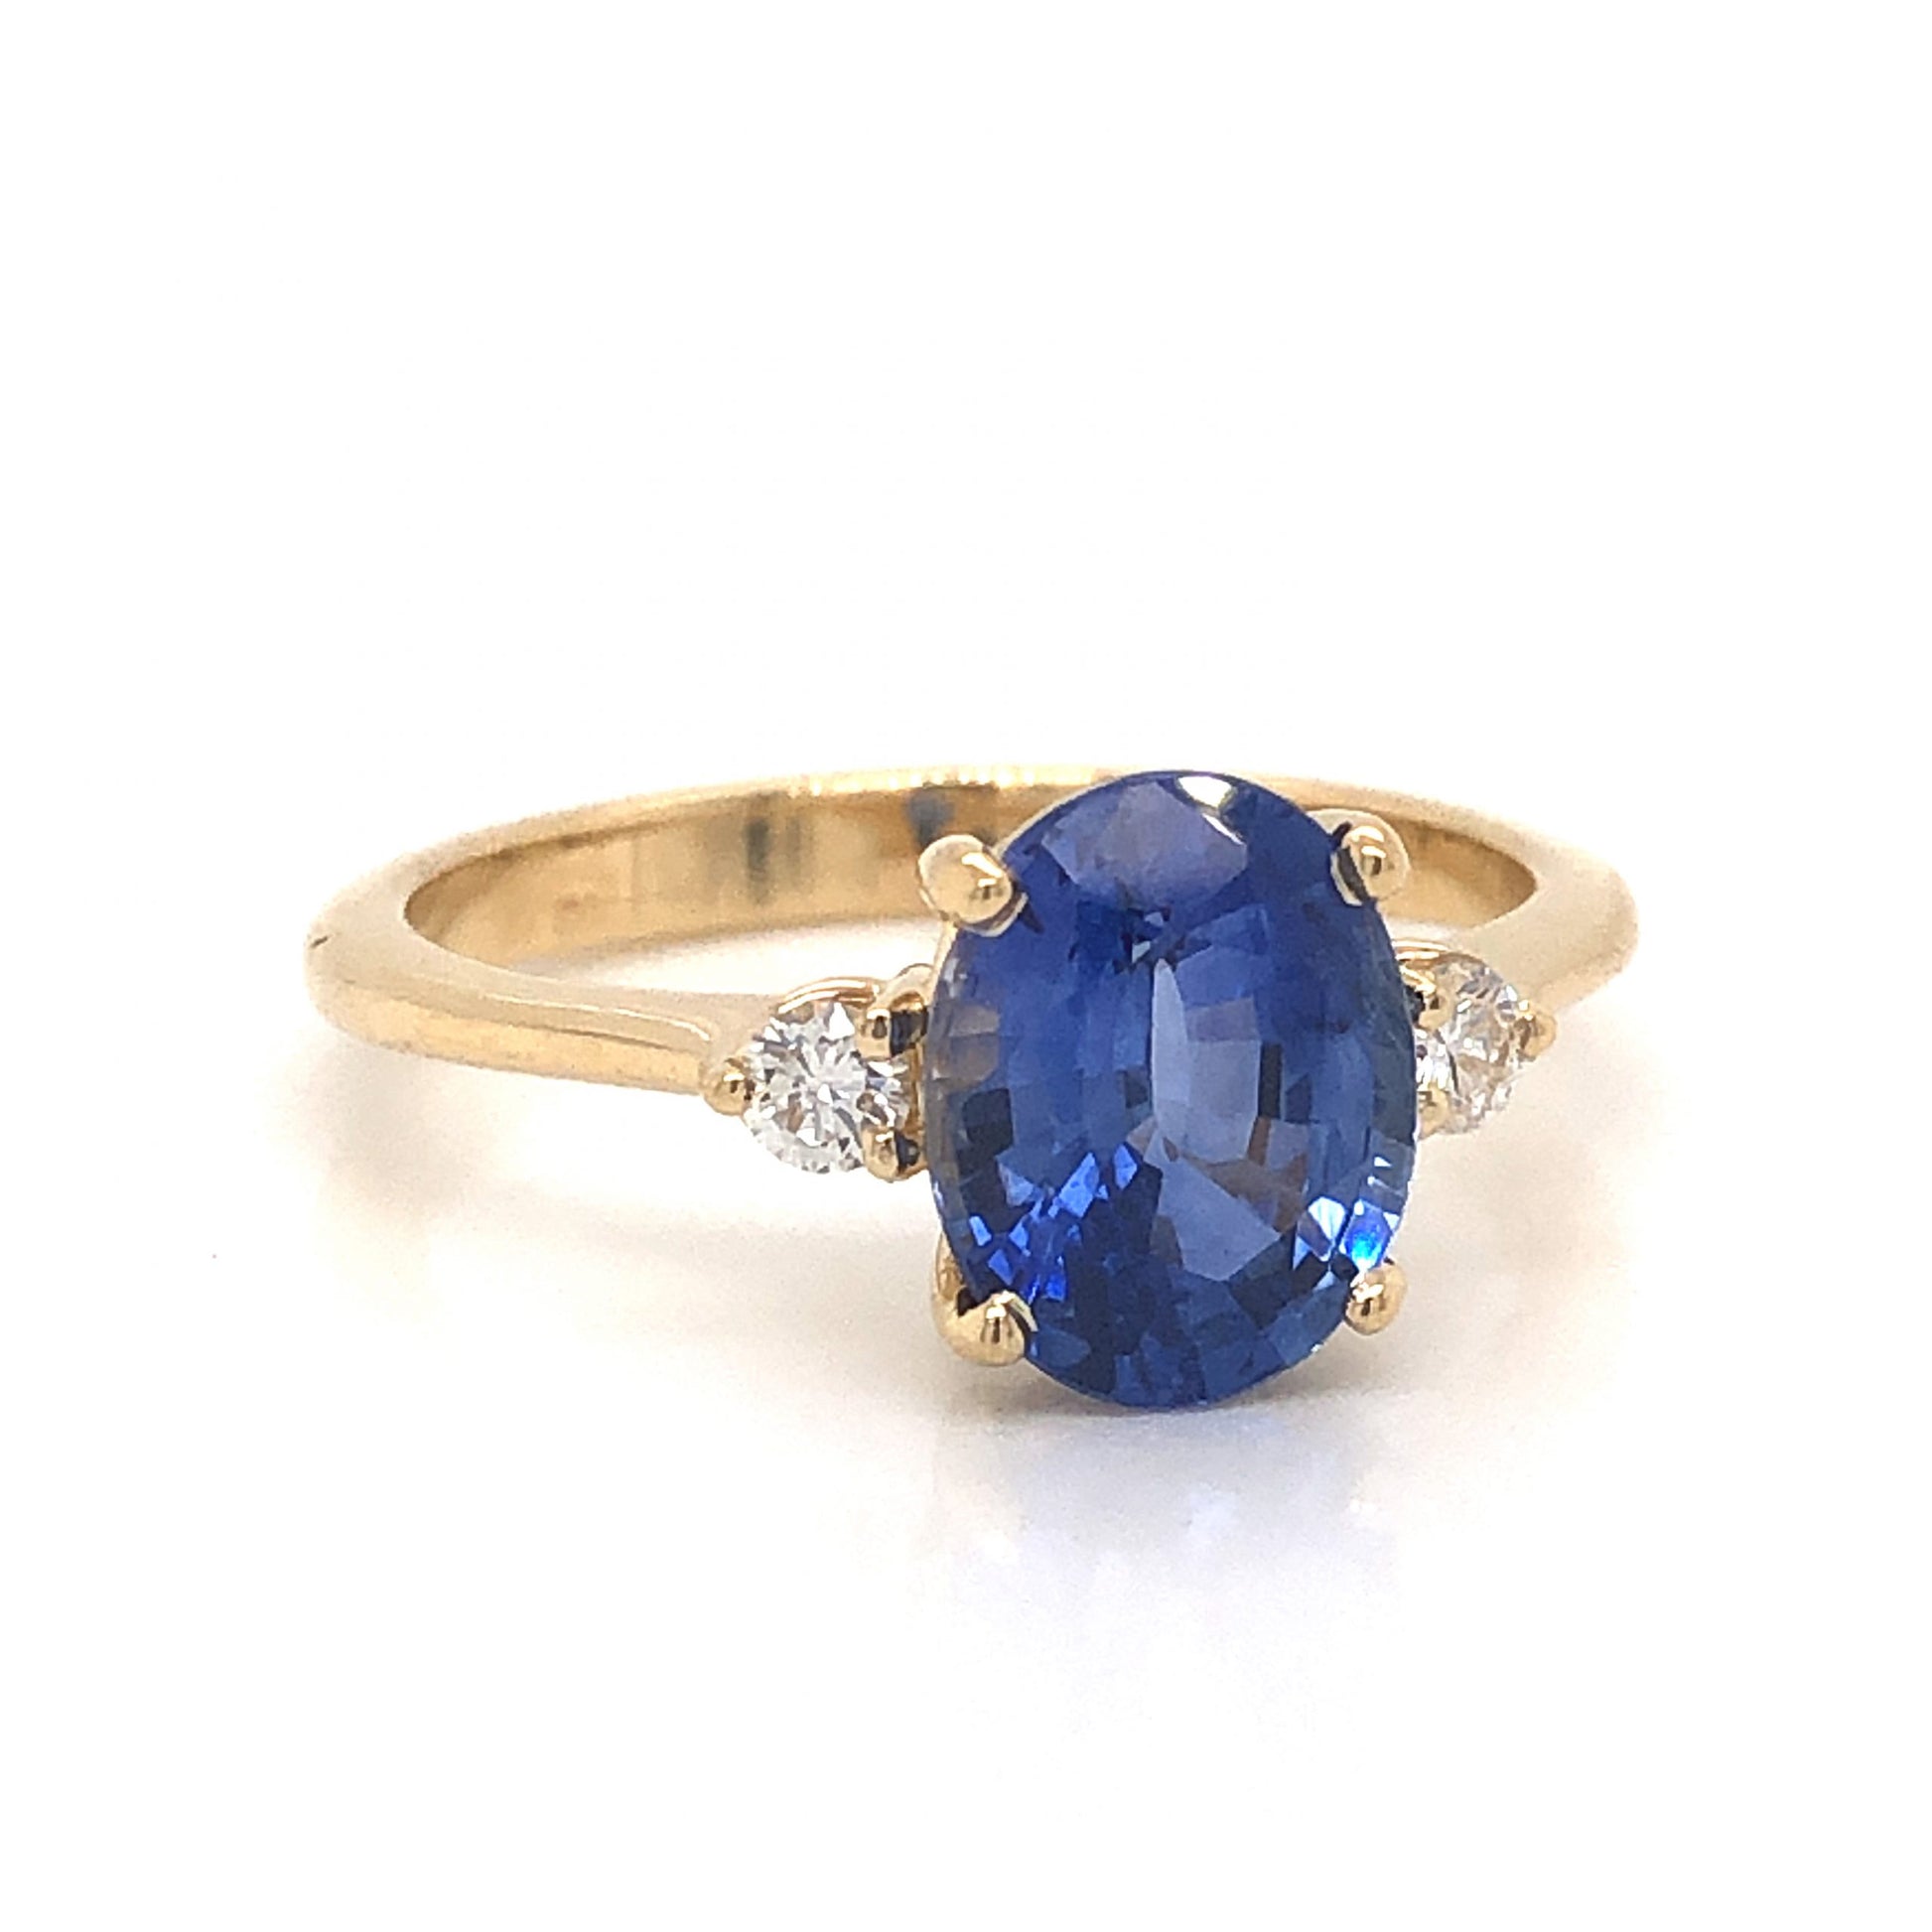 2.23 Oval Cut Sapphire Engagement Ring in Yellow GoldComposition: 14 Karat Yellow Gold Ring Size: 6.75 Total Diamond Weight: .12ct Total Gram Weight: 3.0 g Inscription: 14k
      